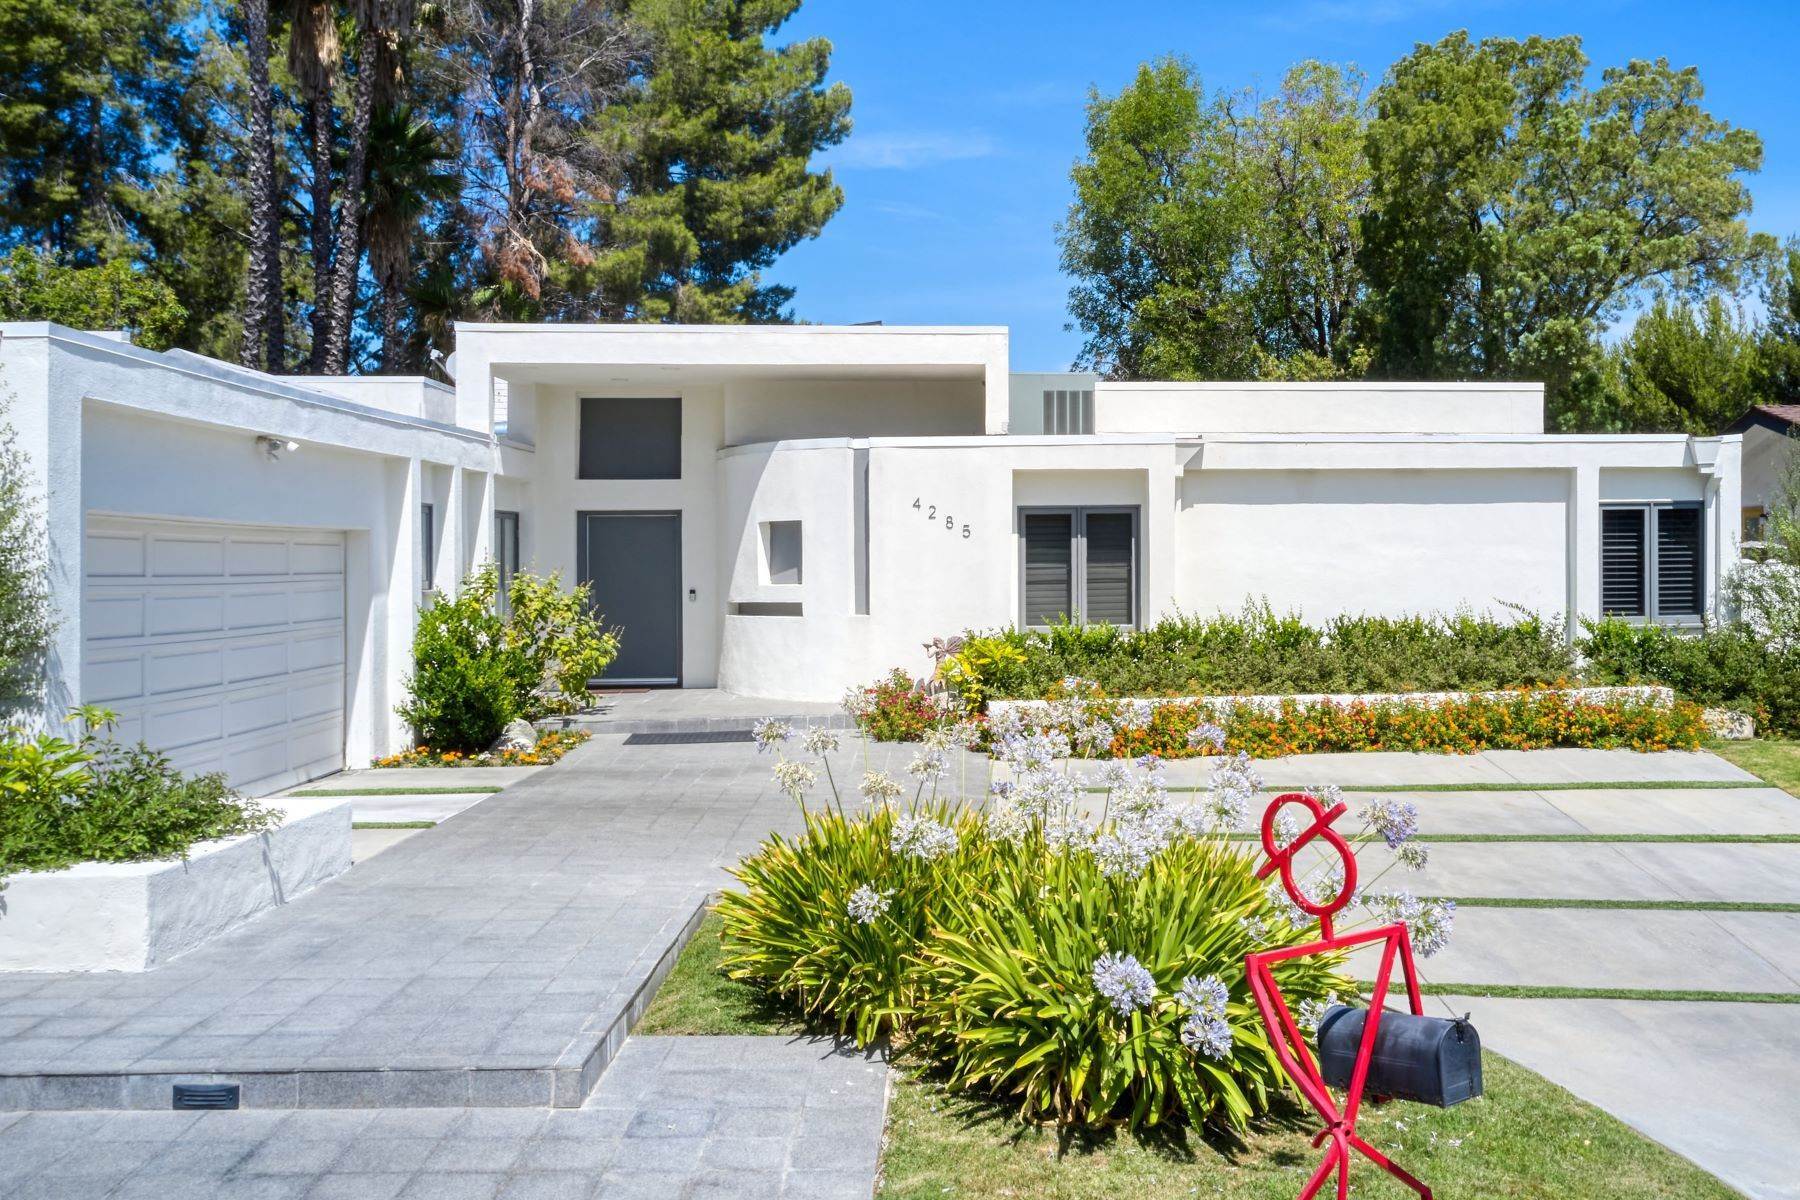 Single Family Homes for Sale at Spectacular Contemporary View Home 4285 Pasadero Place Tarzana, California 91356 United States